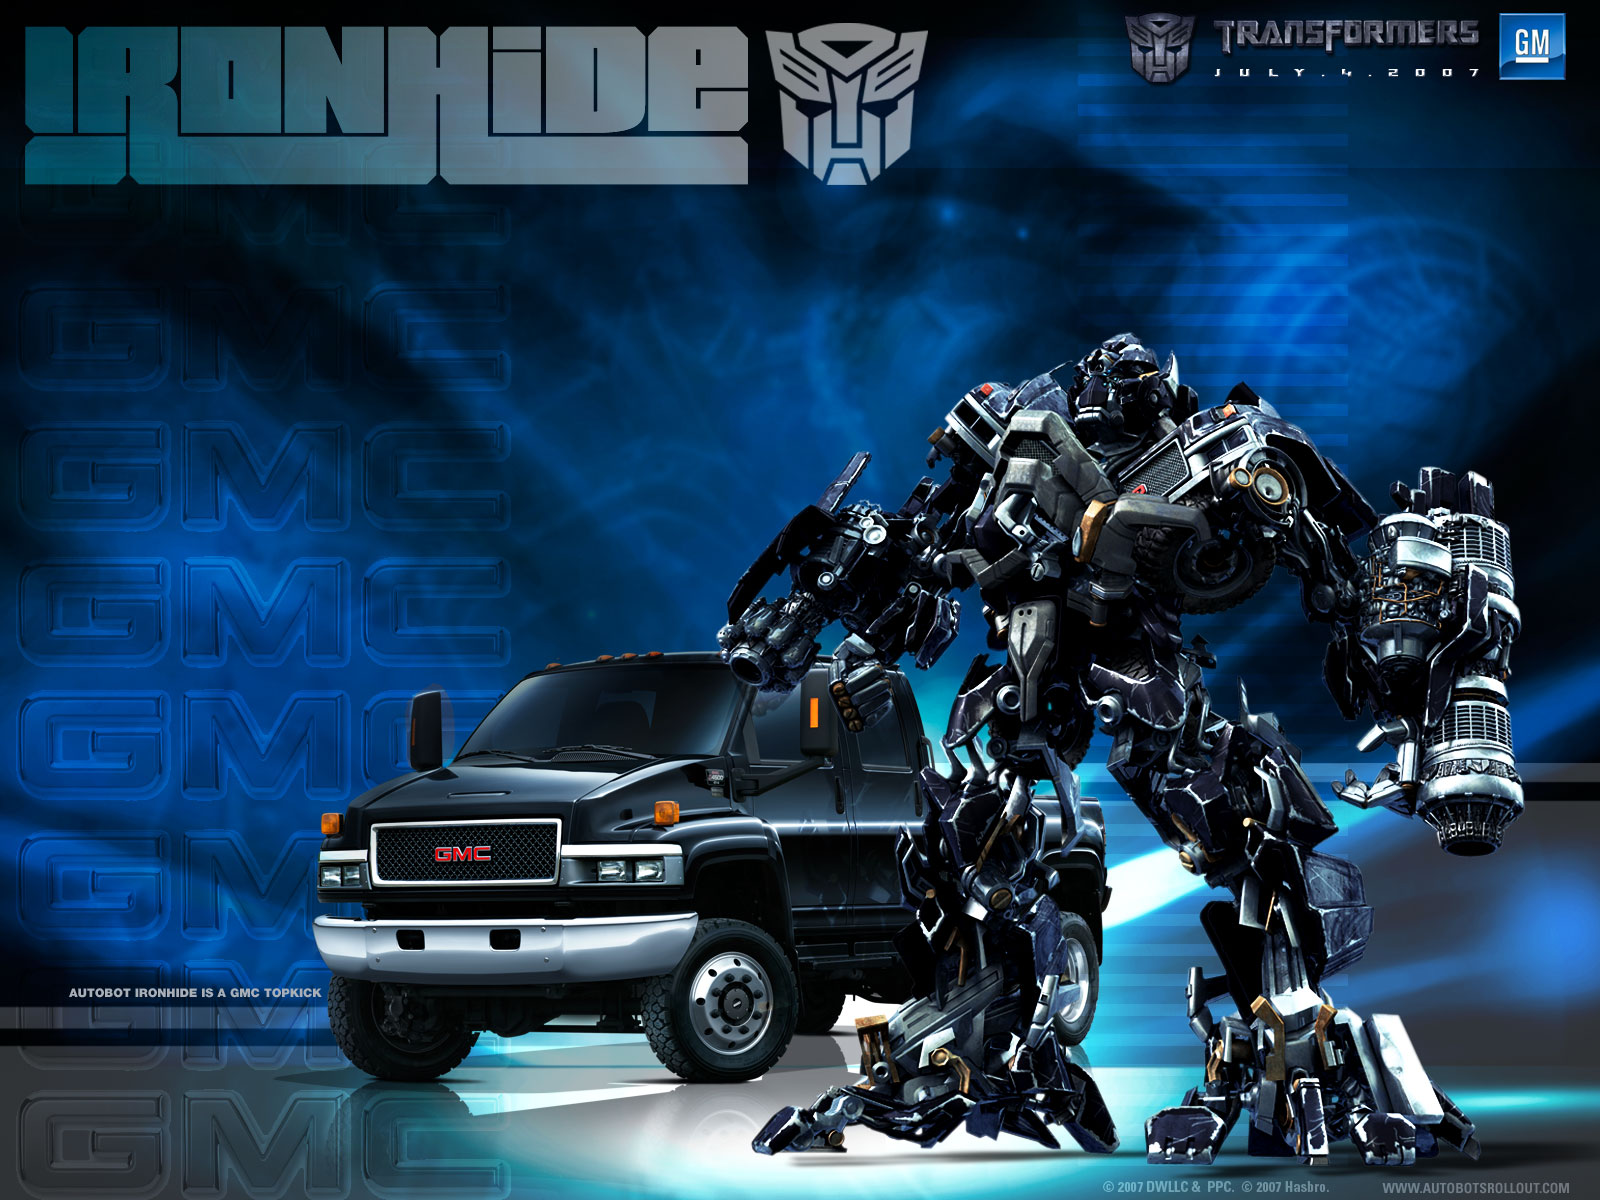 Download full size Transformers wallpaper / Movies / 1600x1200